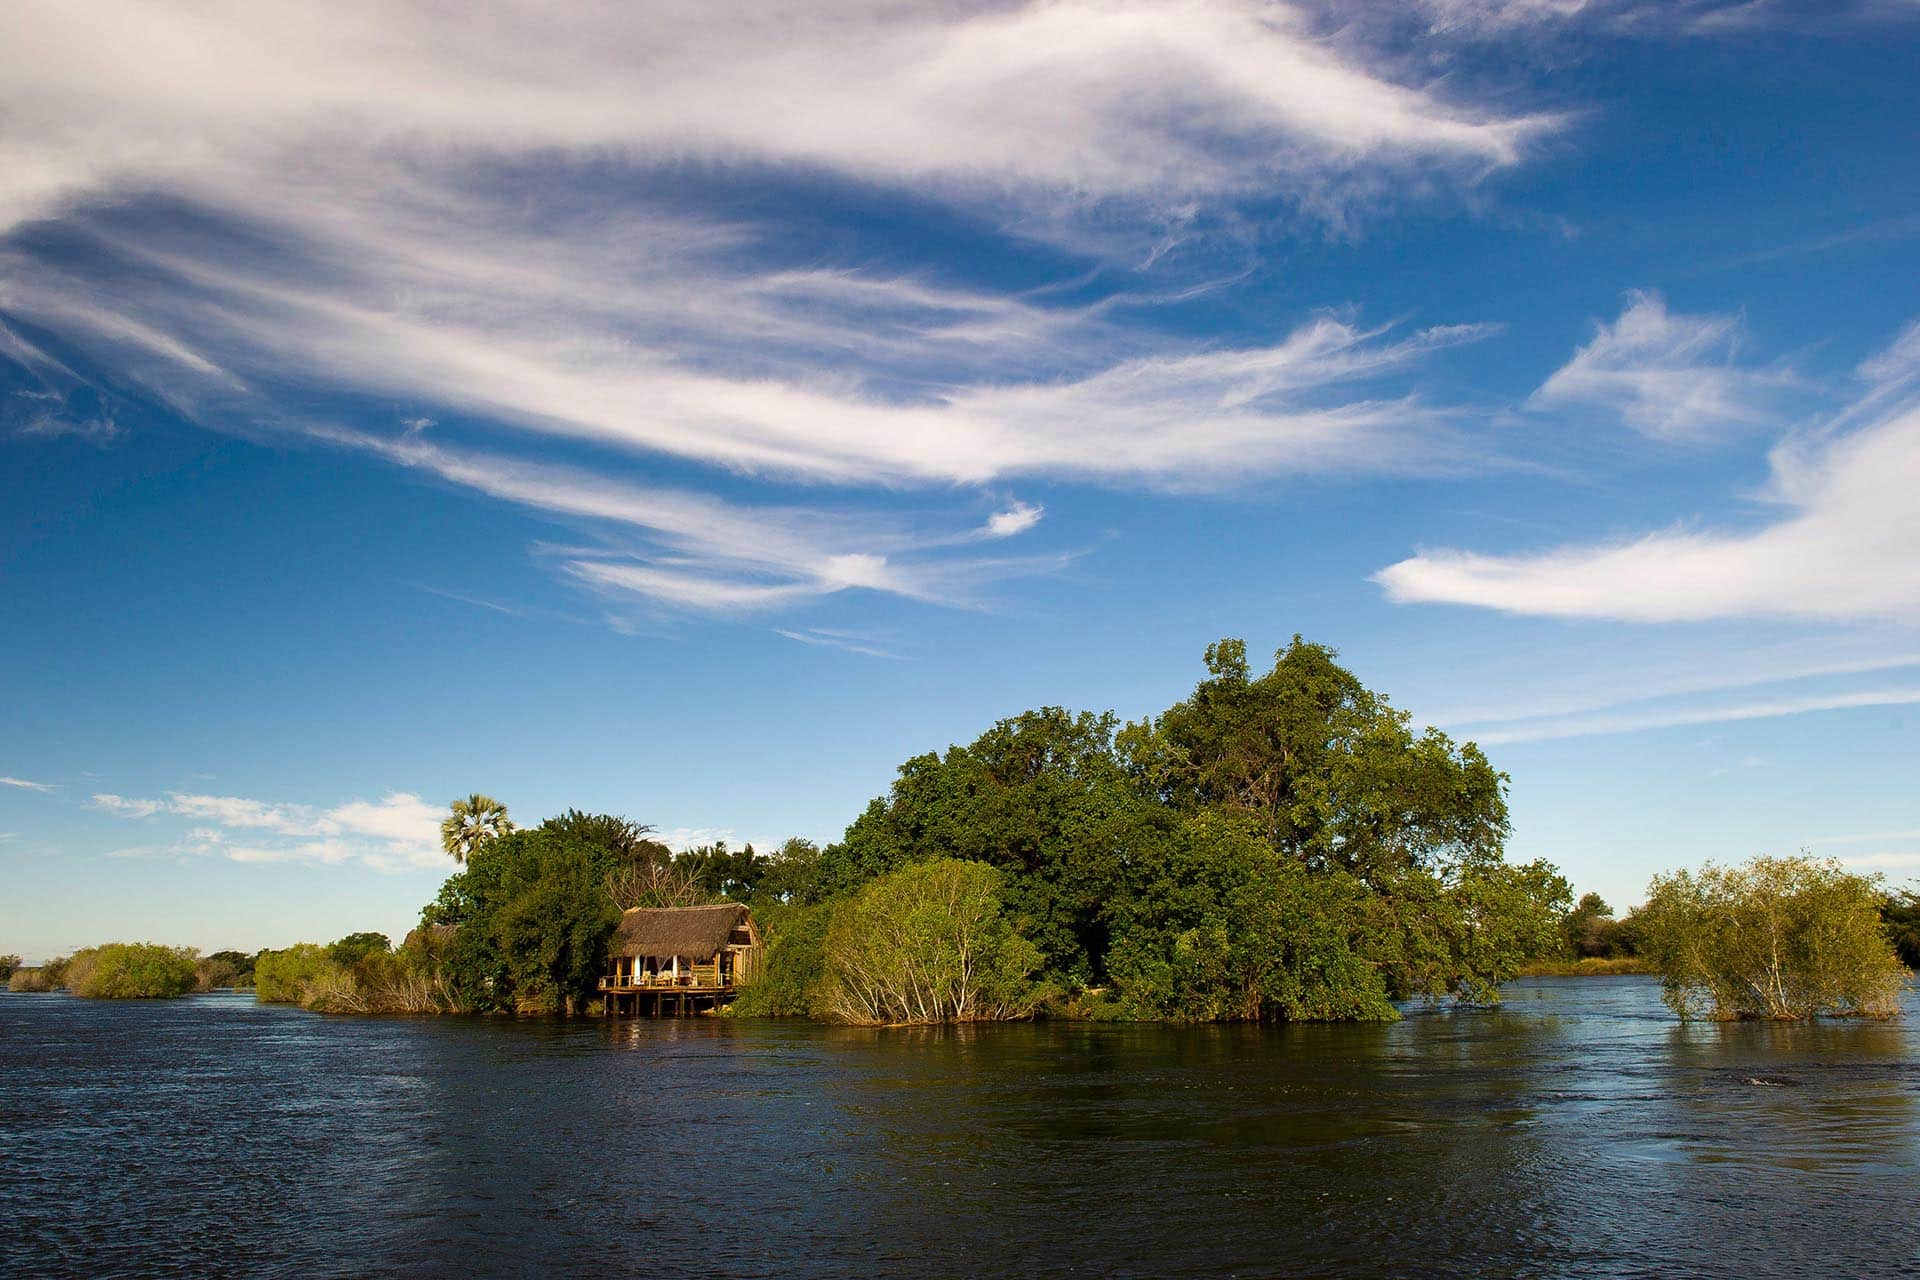 Sindabezi Island in the Zambezi River – one of the top Eco Lodges in Africa.